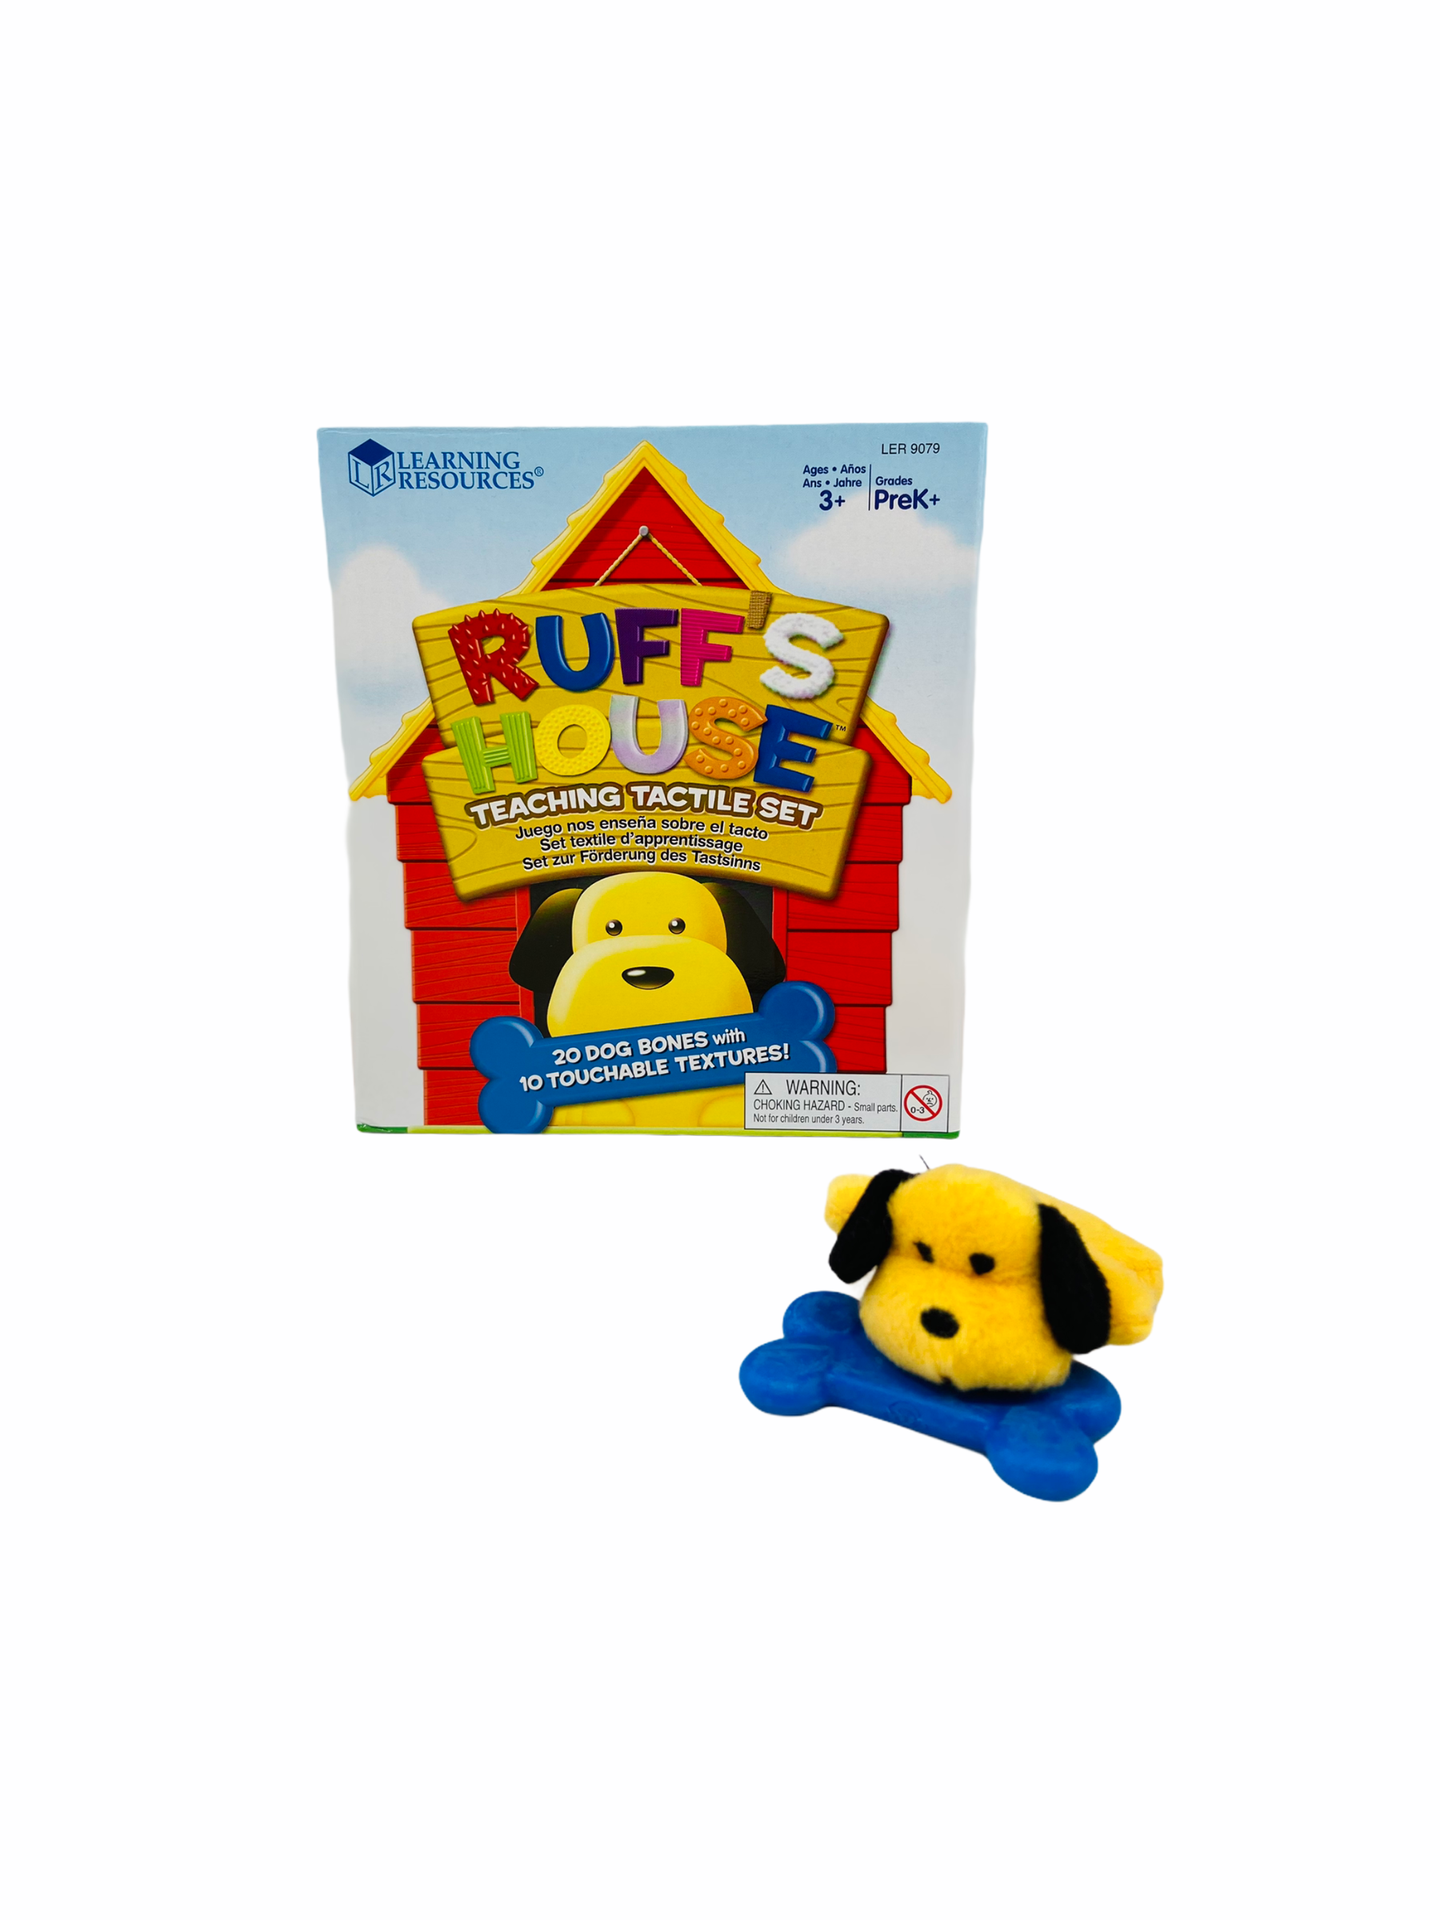 Ruff's House Teaching Tactile Set with Ruff the dog laying outside his house with a blue bone on white background